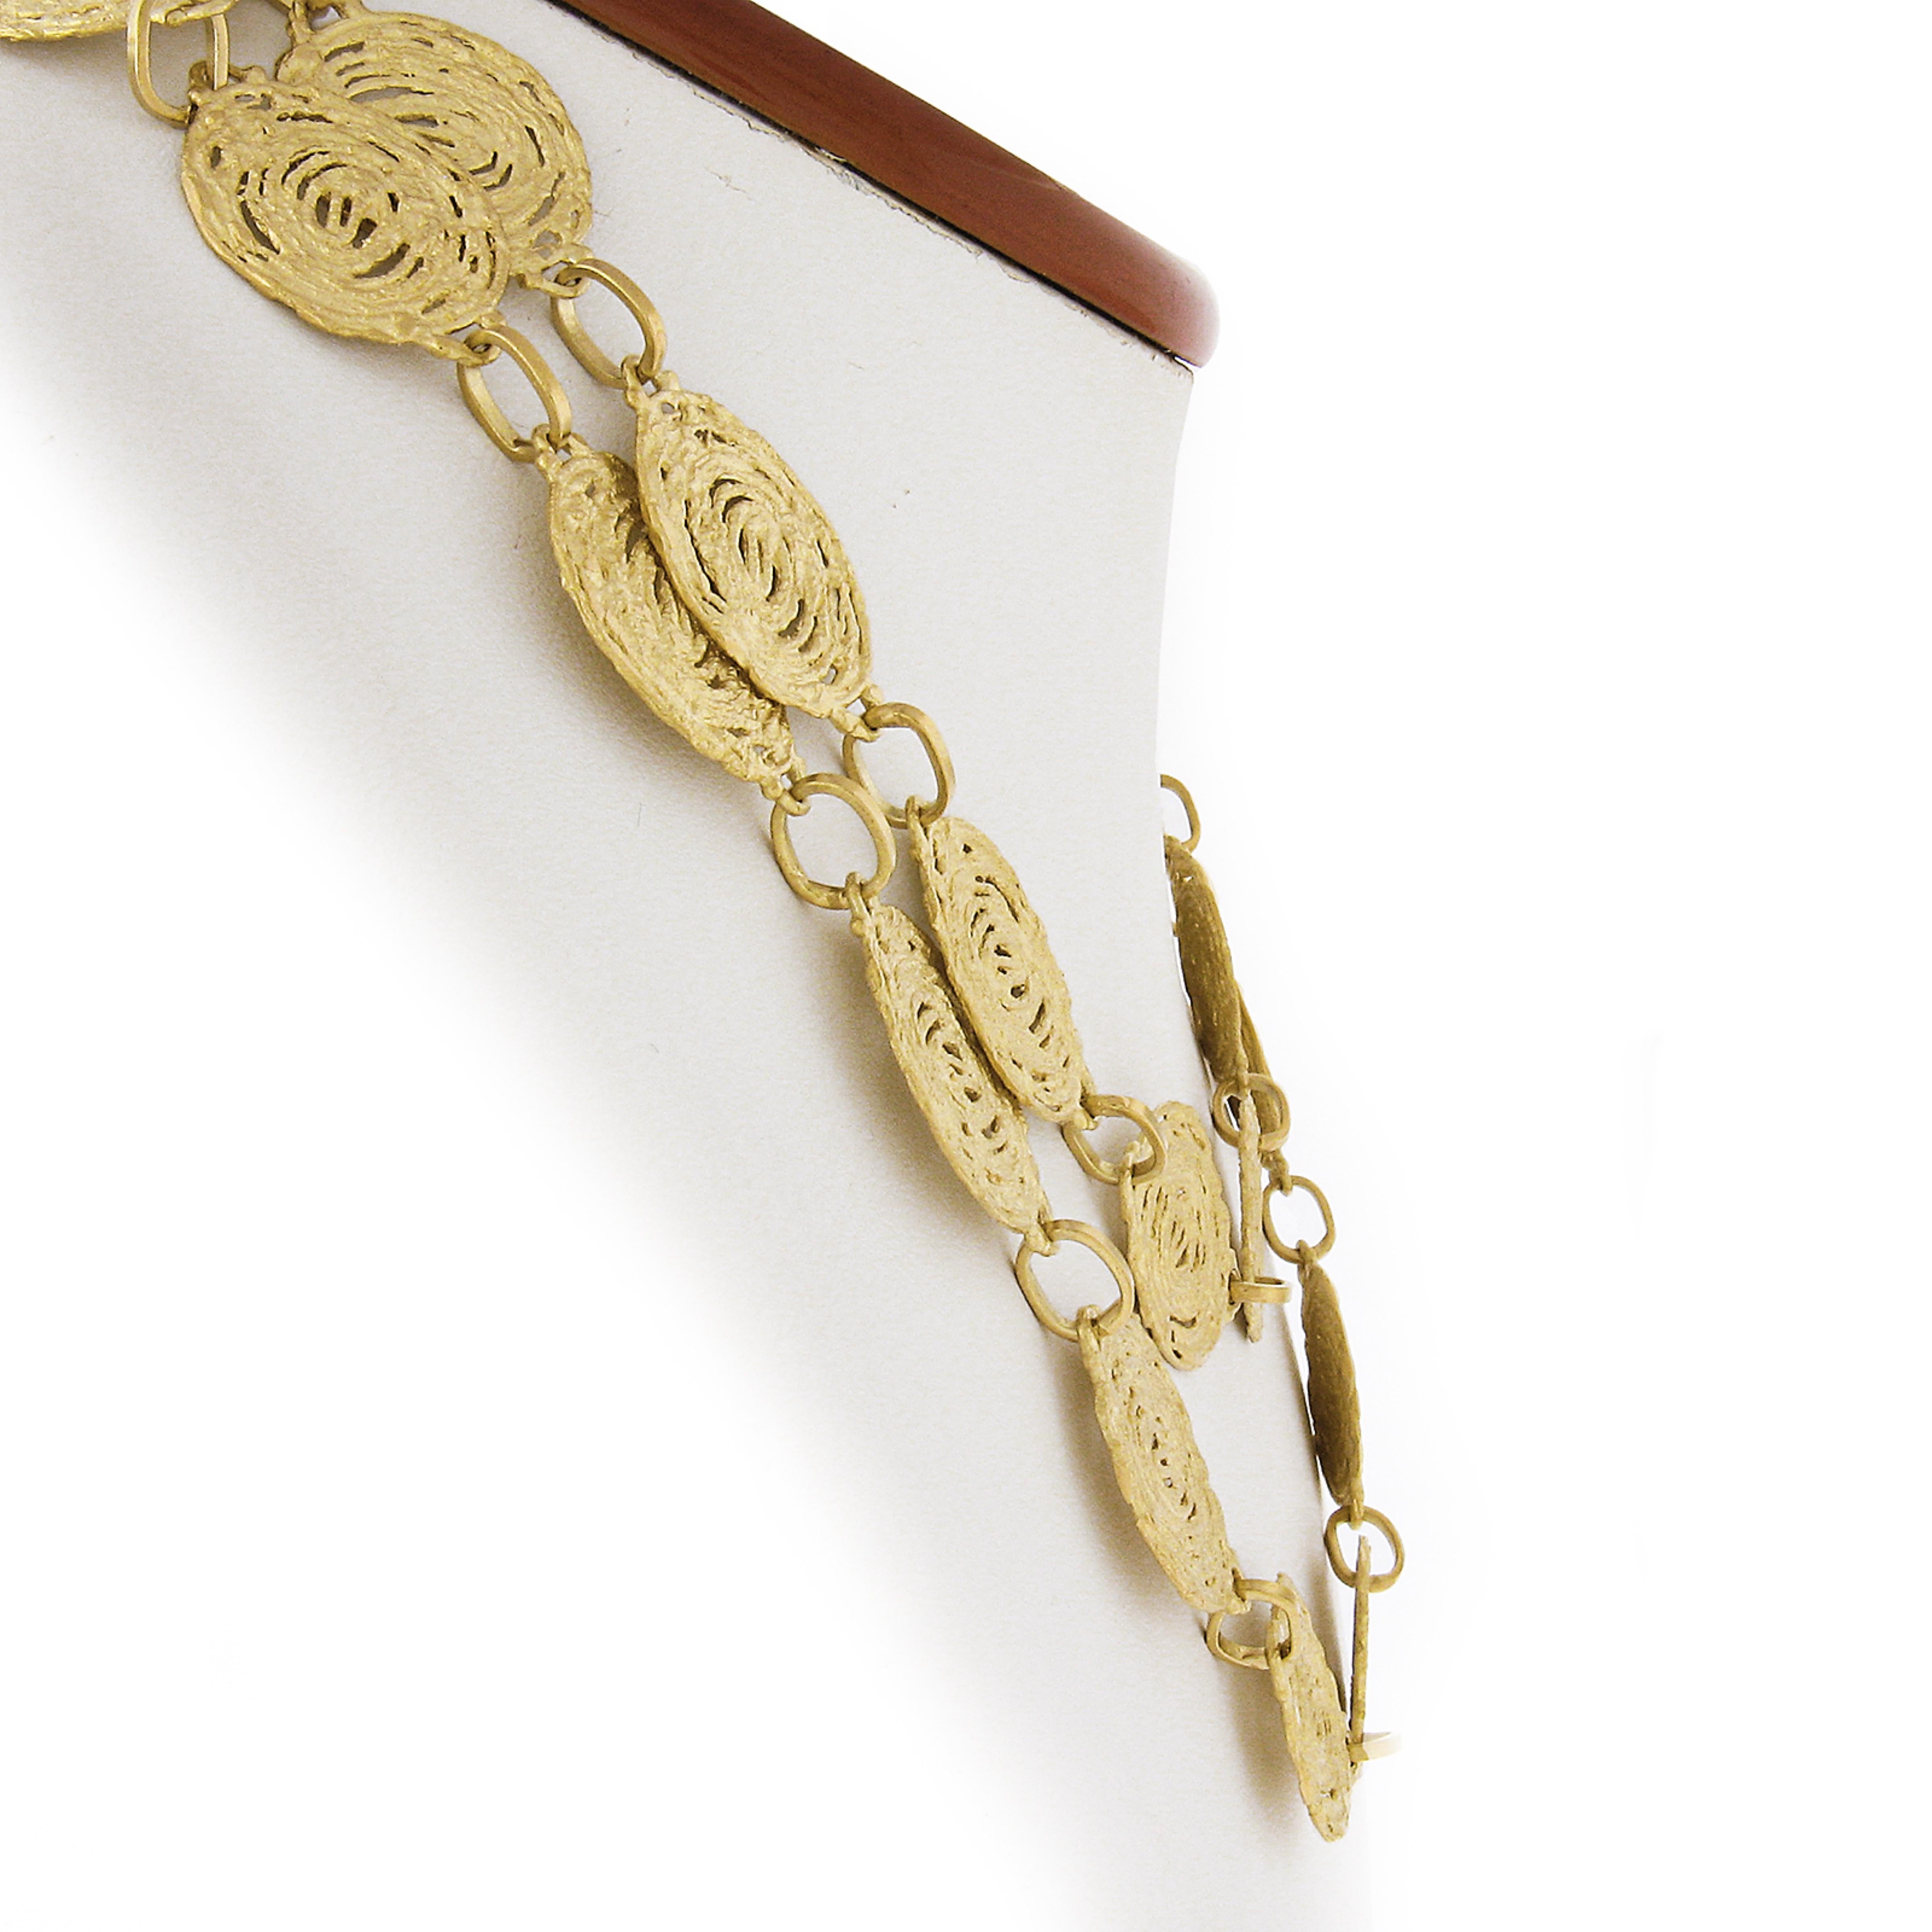 This very unusual long statement chain necklace is very well crafted in Italy in solid 18k yellow gold. Its design features unique free form swirl link design that almost looks like a tree stump print with dual finishes. This chain measures 34